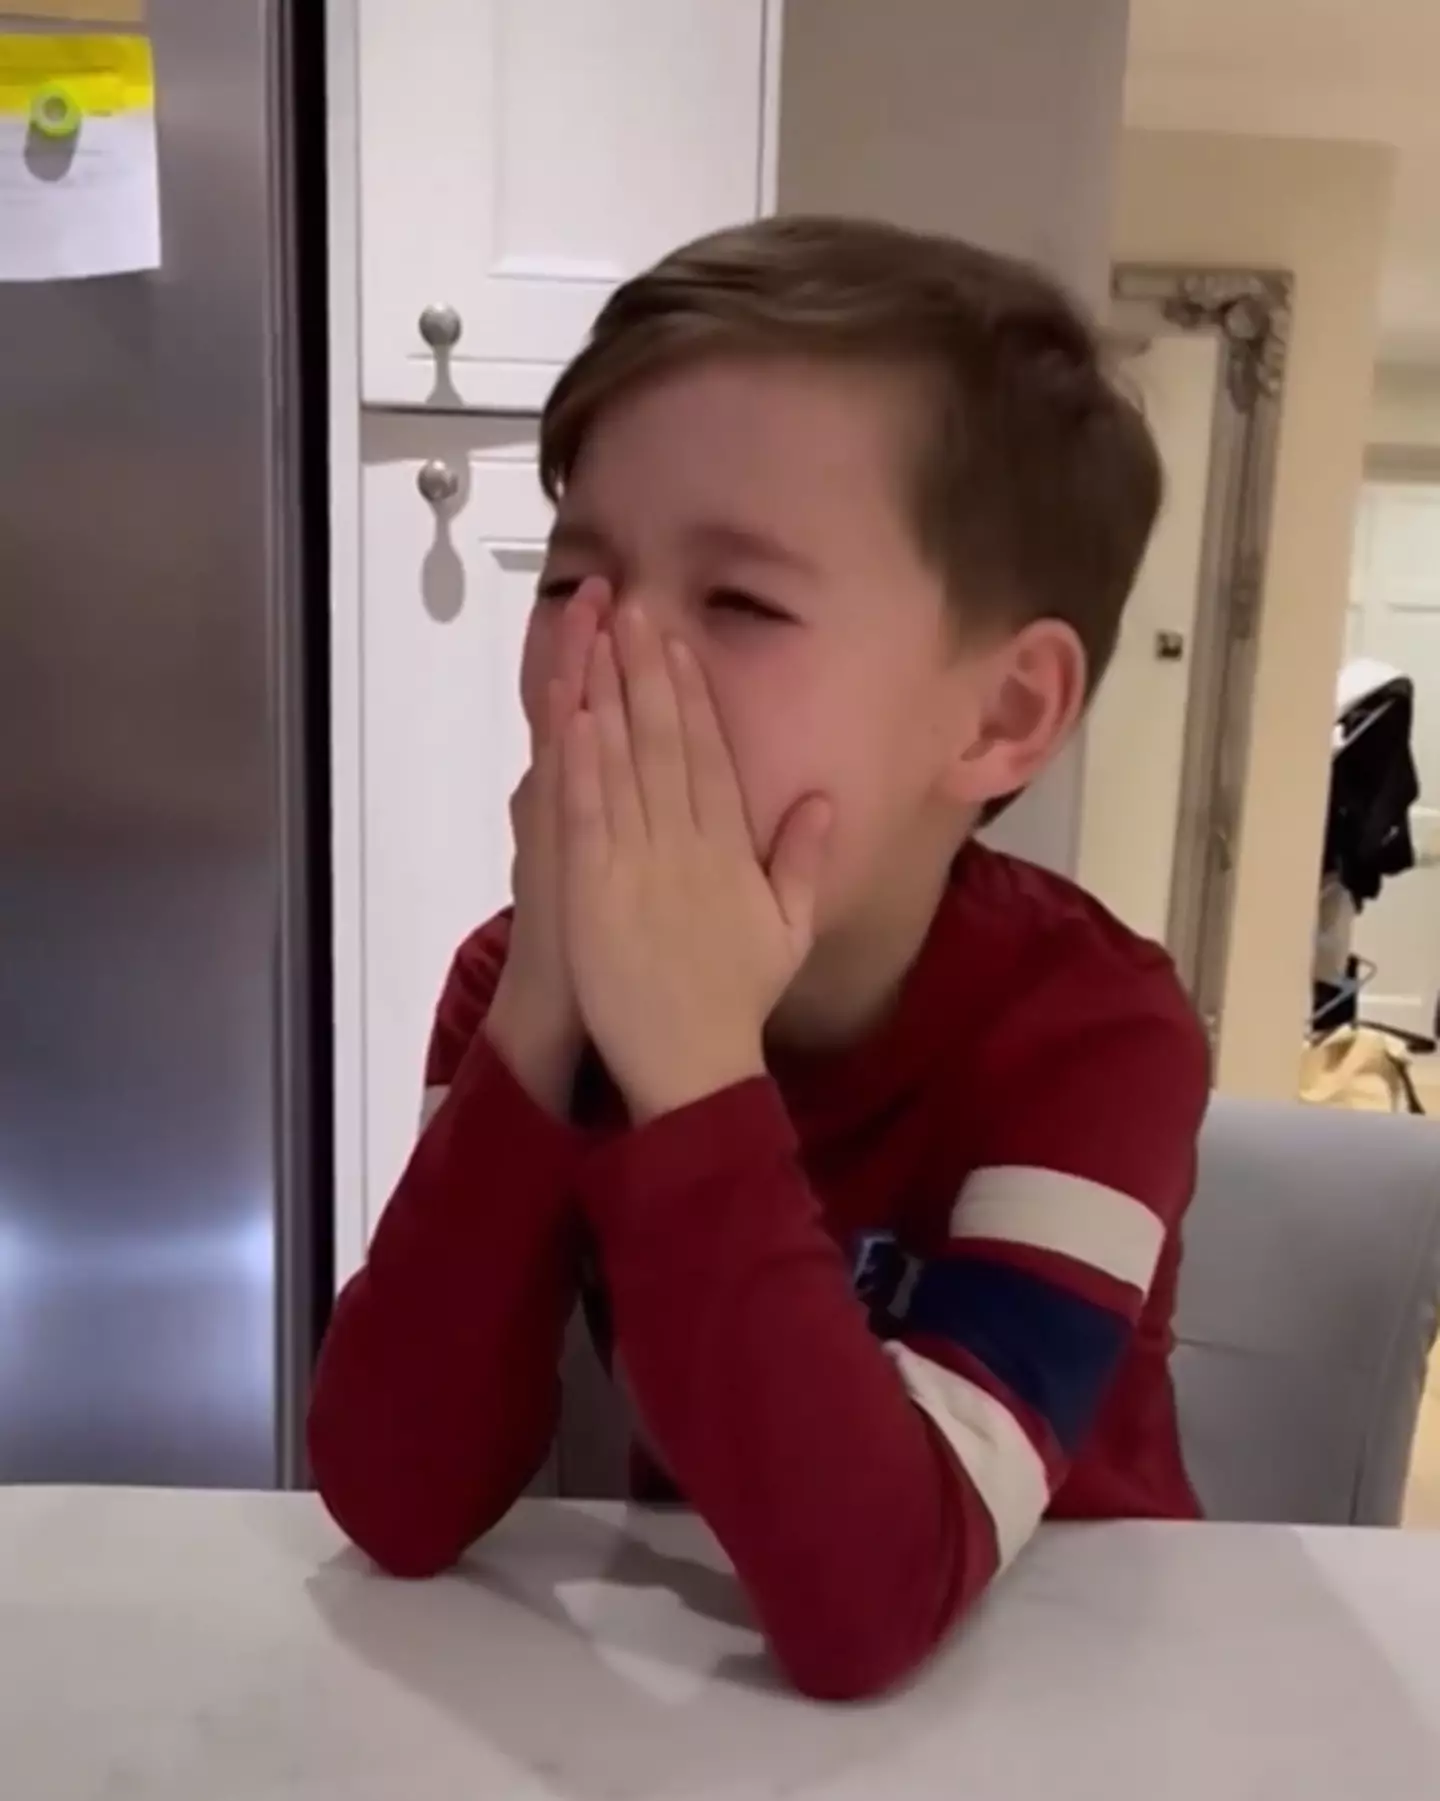 Teddy burst into tears when he found out he would be casted.